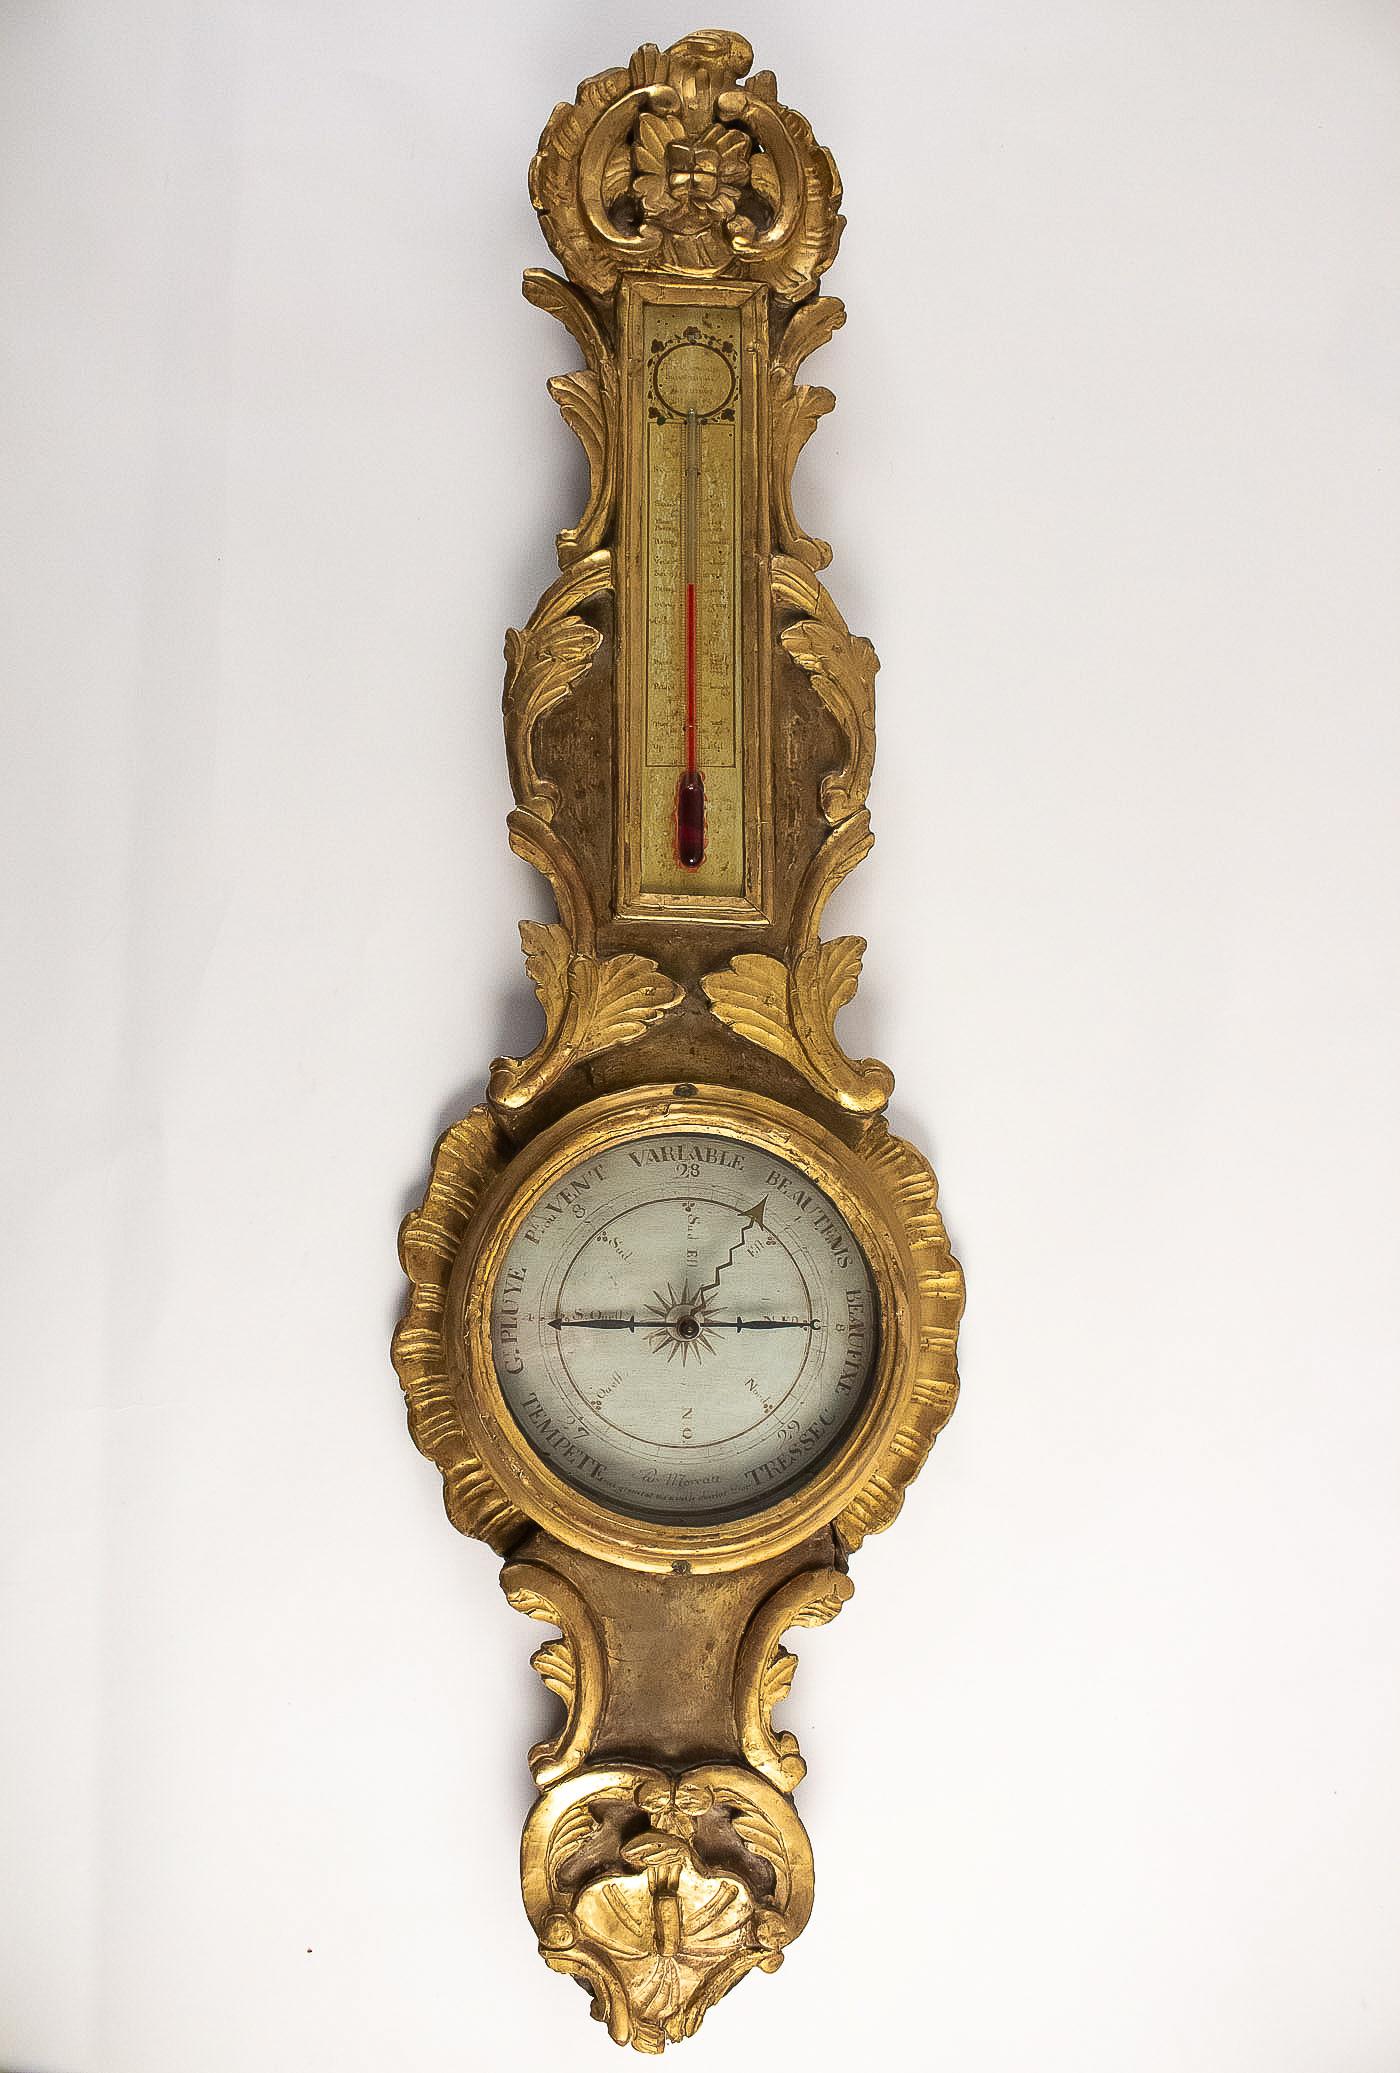 By Moreau, French Louis XV period decorative barometer-thermometer, circa 1770

A gorgeous and decorative mid-18th century item, with this Barometer-Thermometer, in gilt and lacquered Tilleul green color hand carved wood. 
The Reaumur